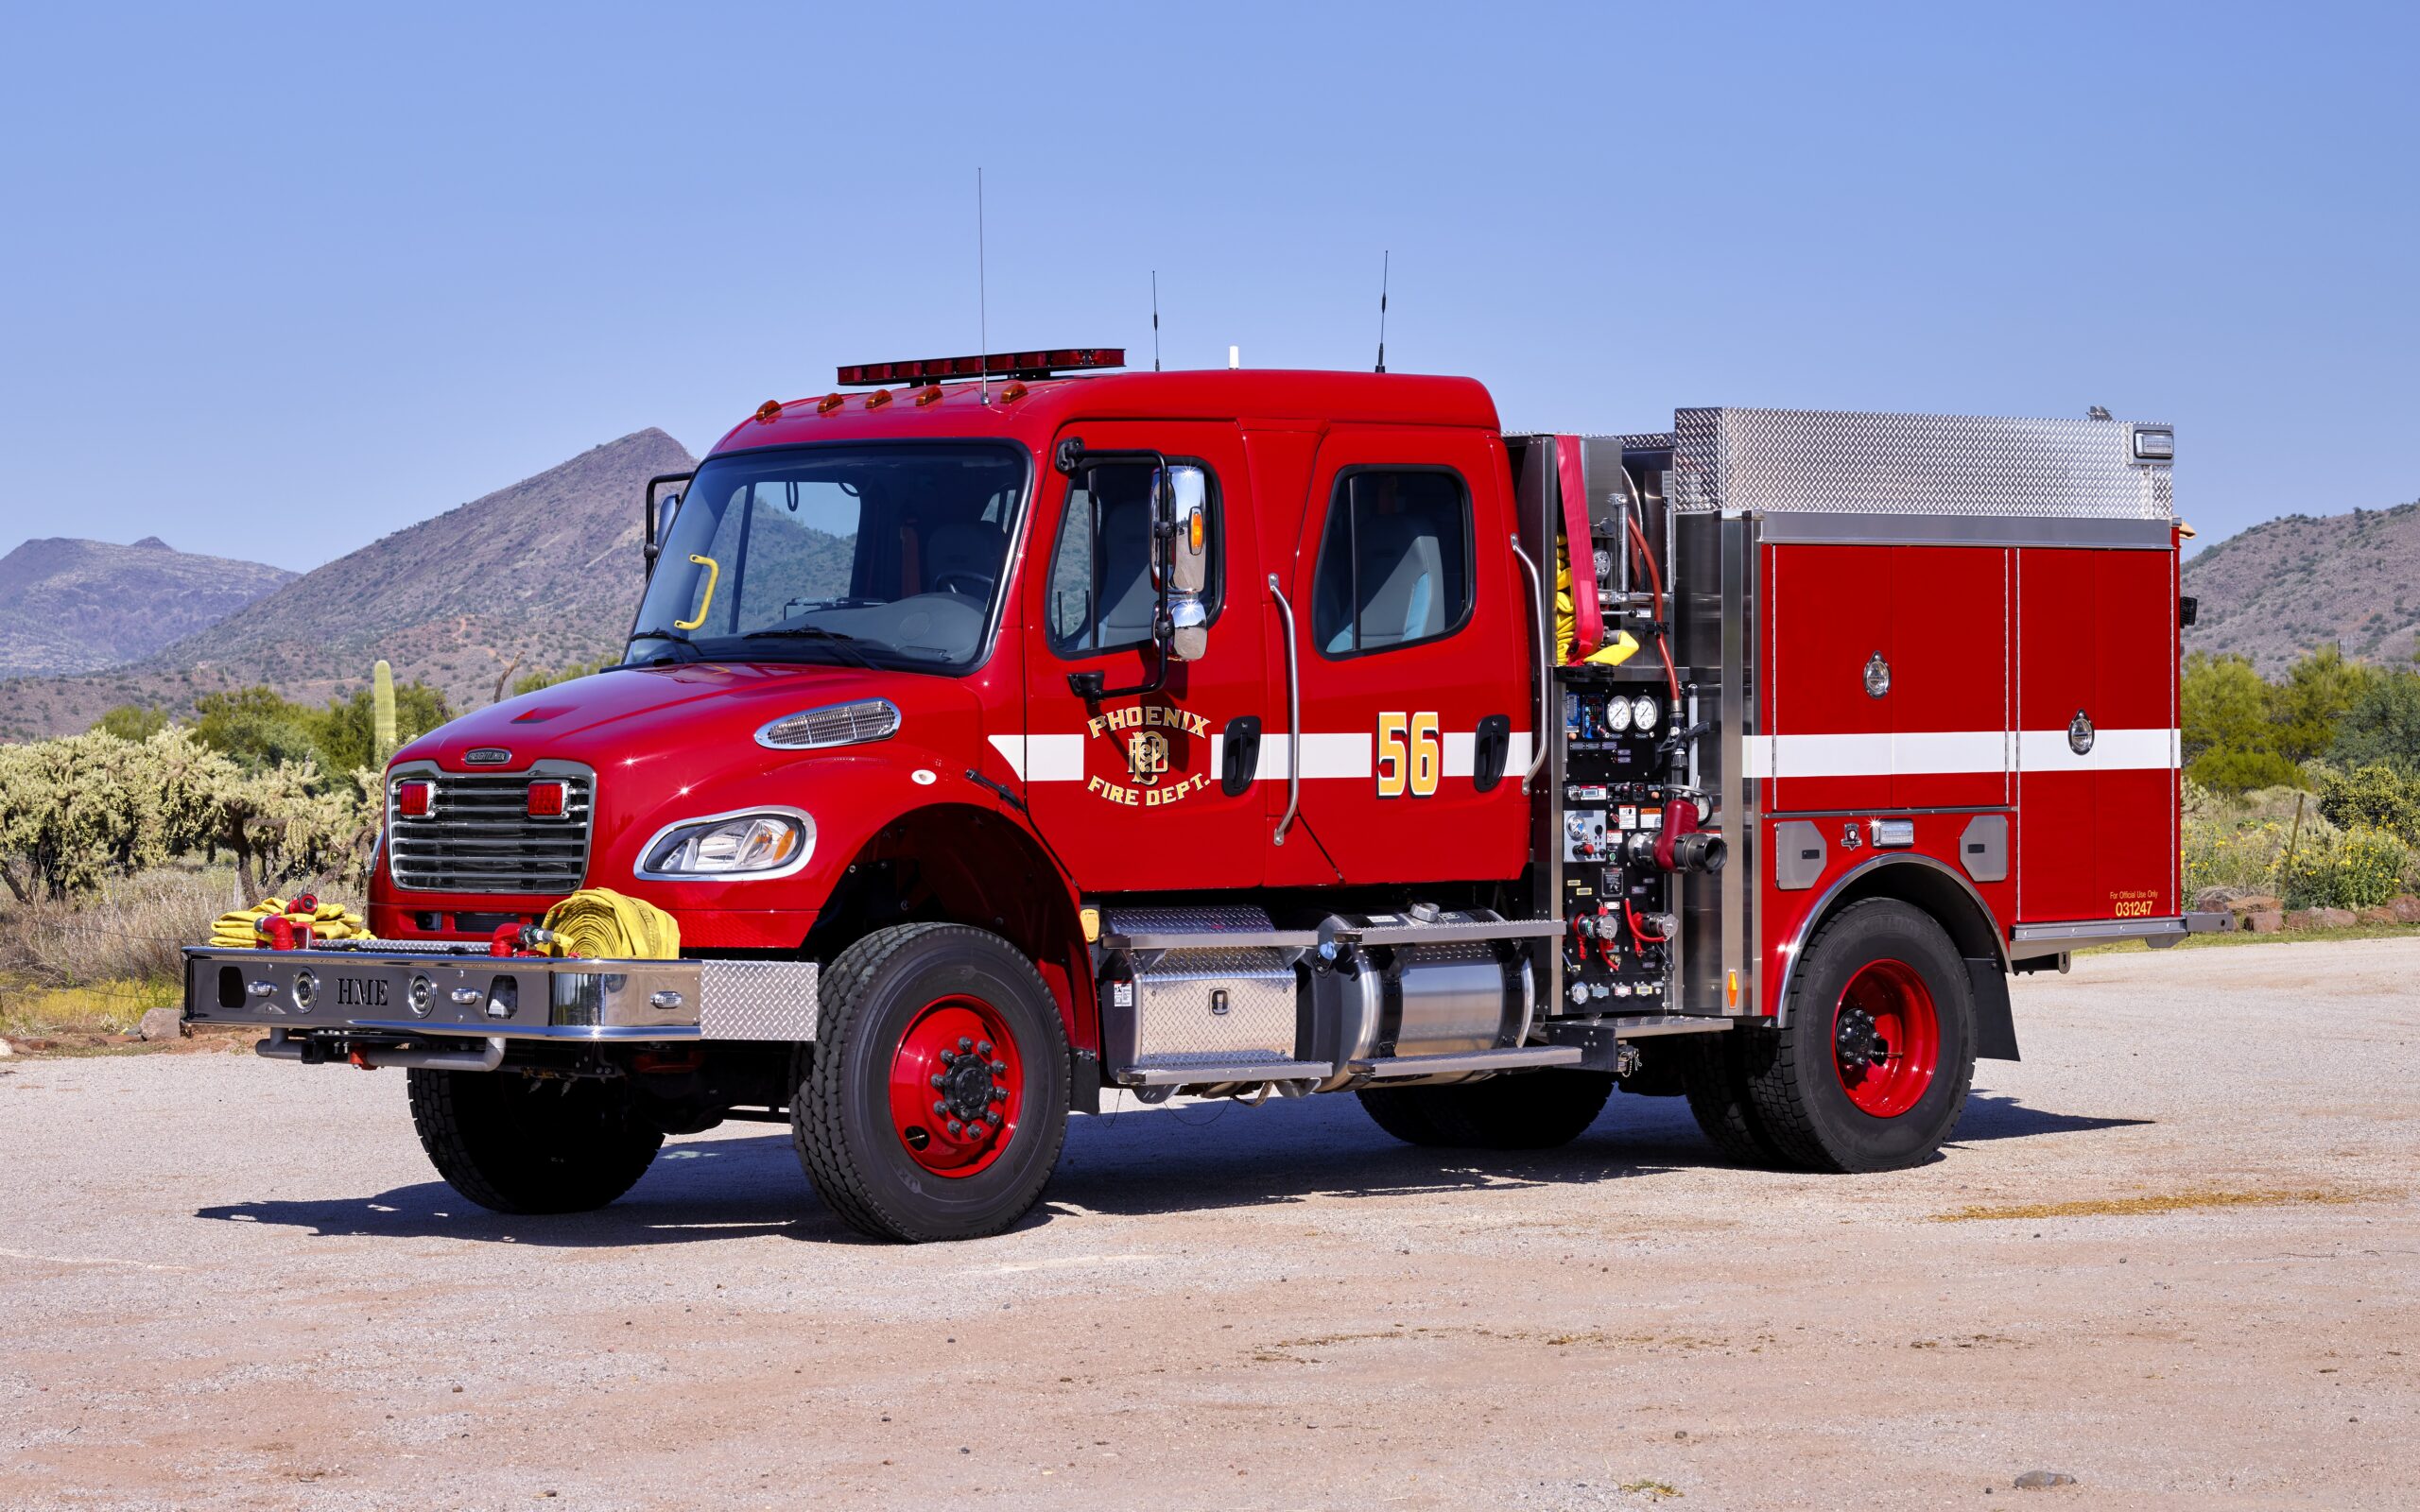 What Are the Different Types of Fire Trucks and Fire Engines